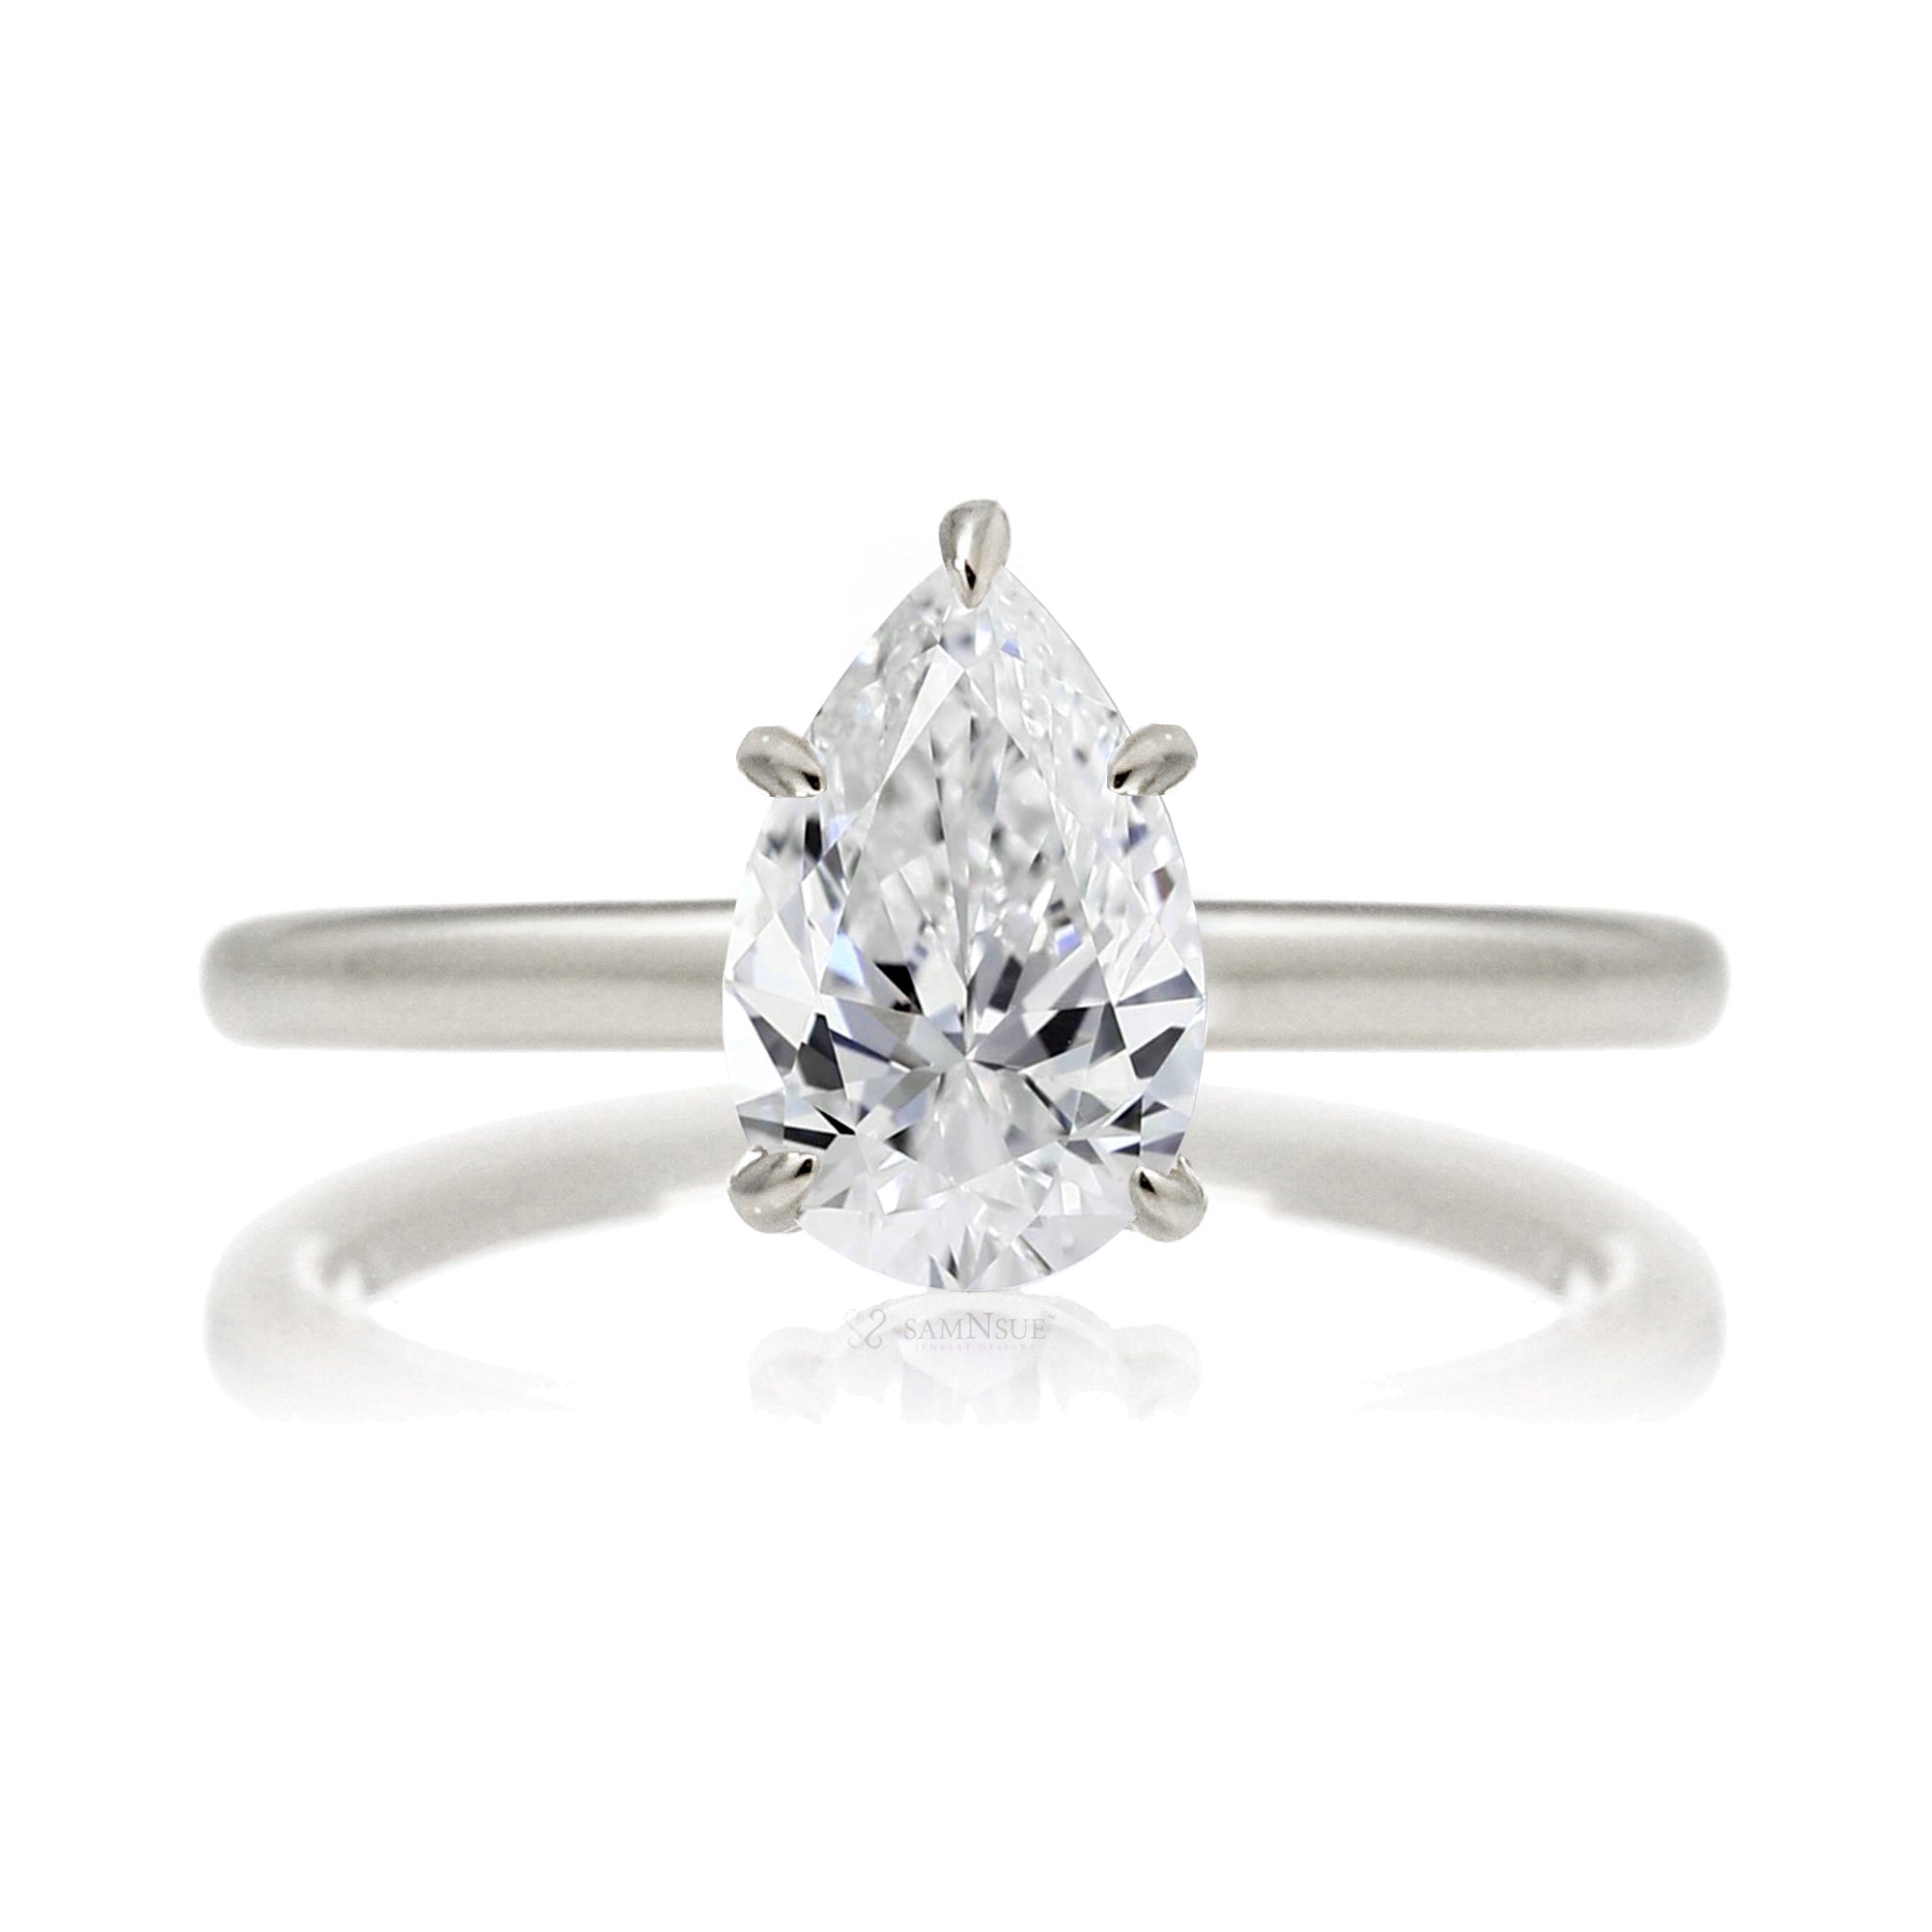 Pear cut solitaire diamond engagement ring with a hidden halo and solid polished band in white gold